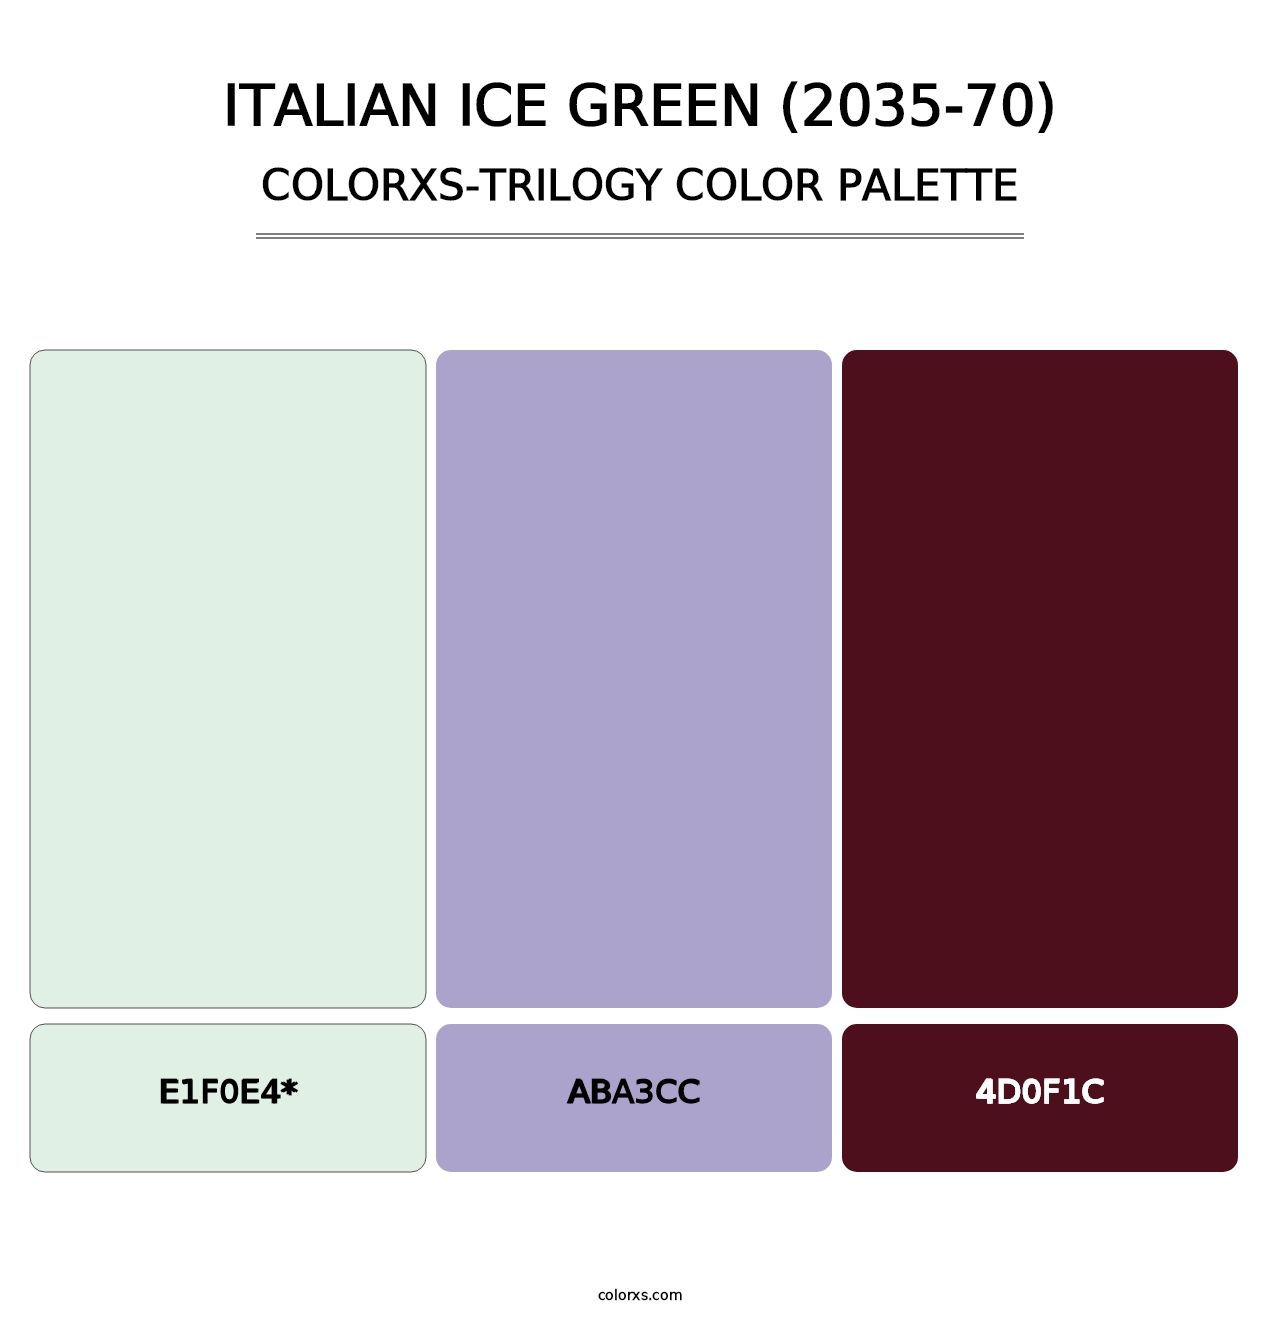 Italian Ice Green (2035-70) - Colorxs Trilogy Palette